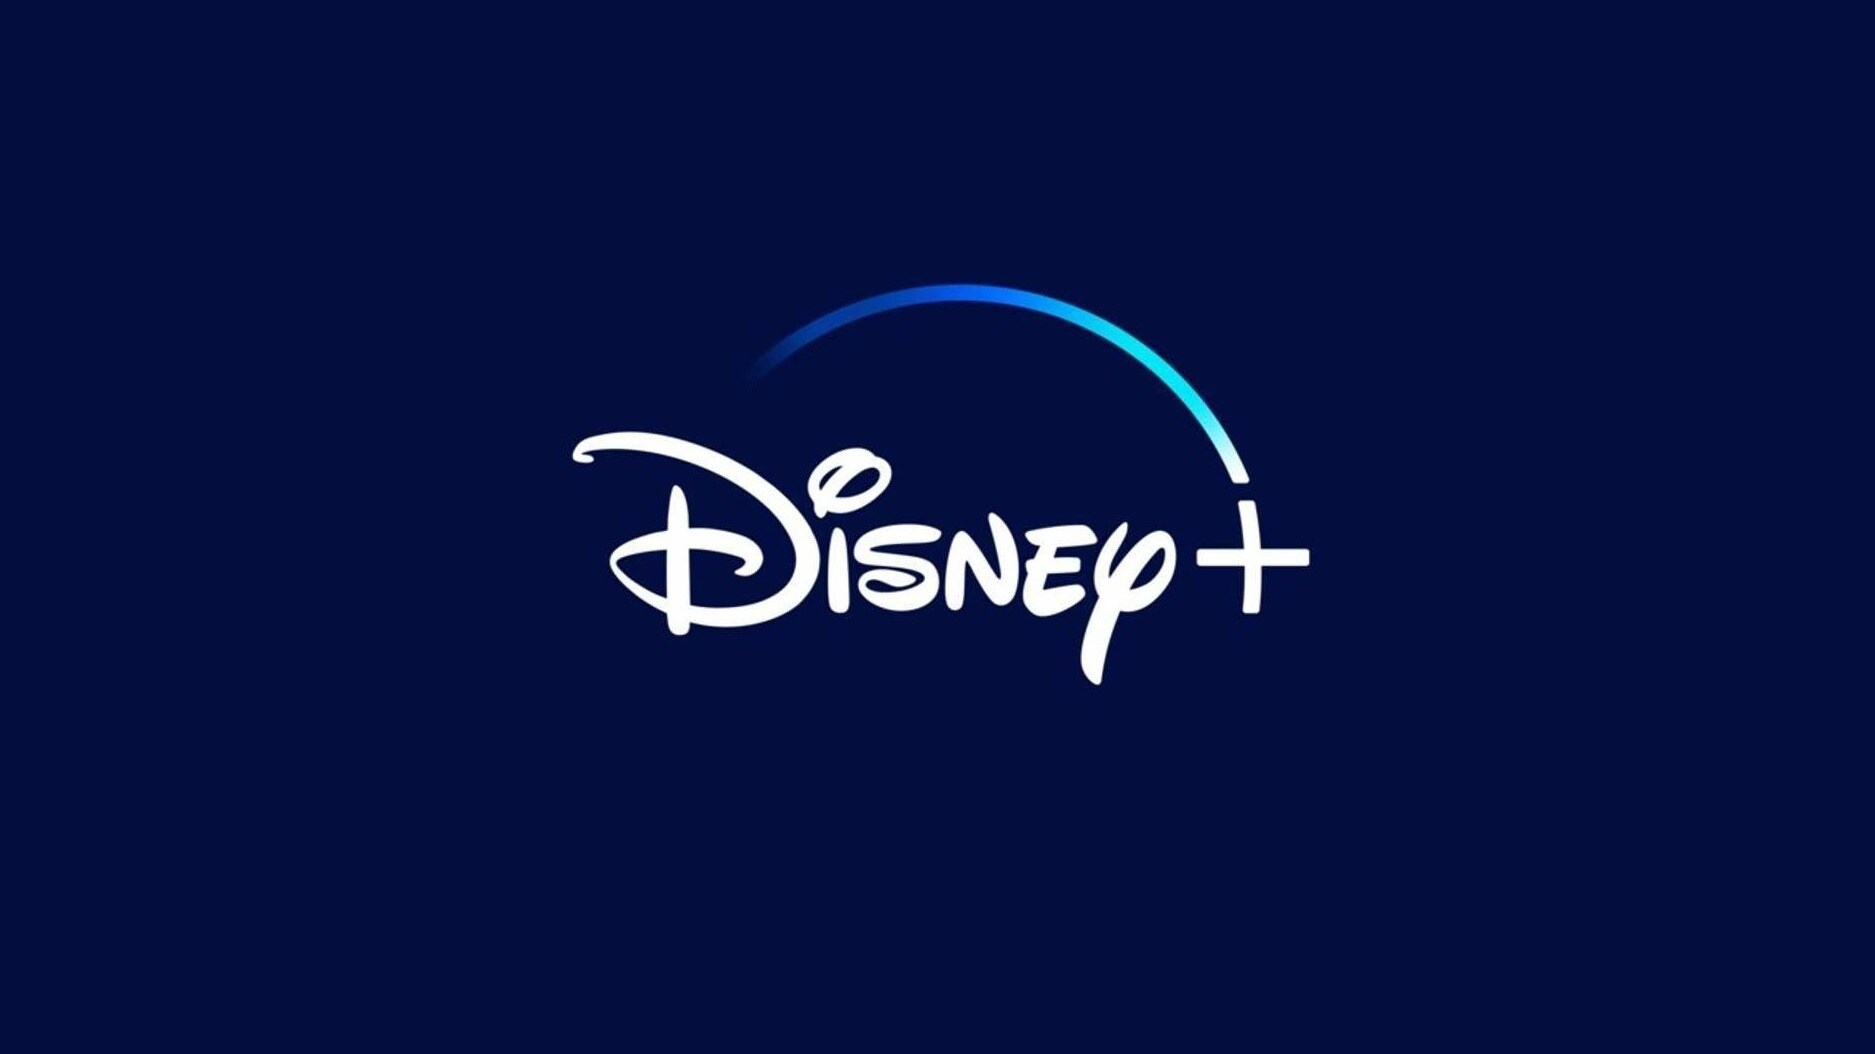 Updates to Disney+ pricing plans in Australia and New Zealand